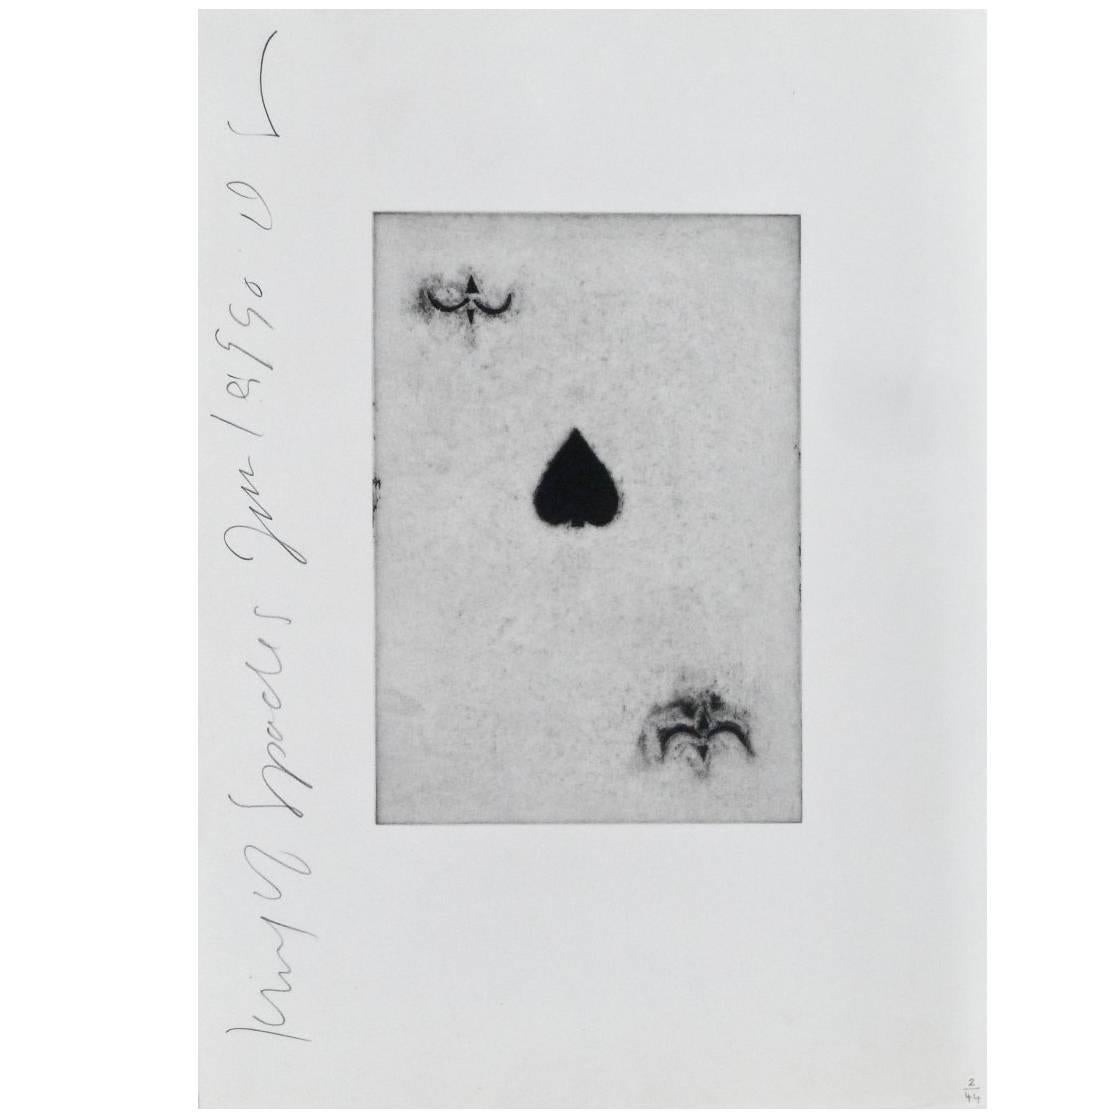 Aquatint Etching by Donald Sultan; "King of Spades", 1990 For Sale